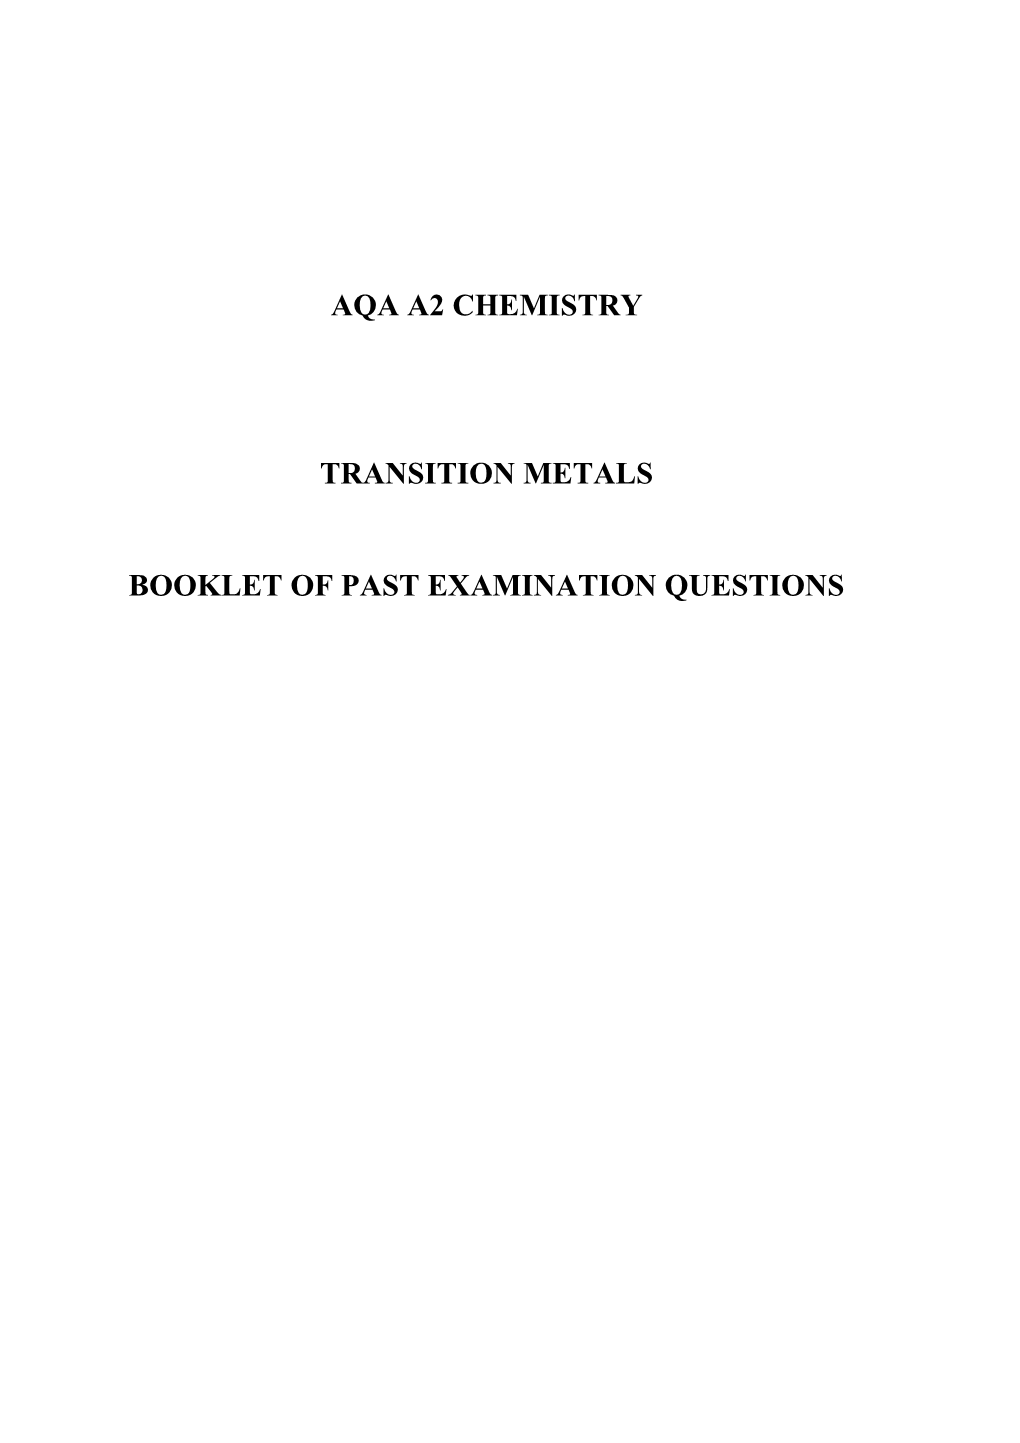 Booklet of Past Examination Questions